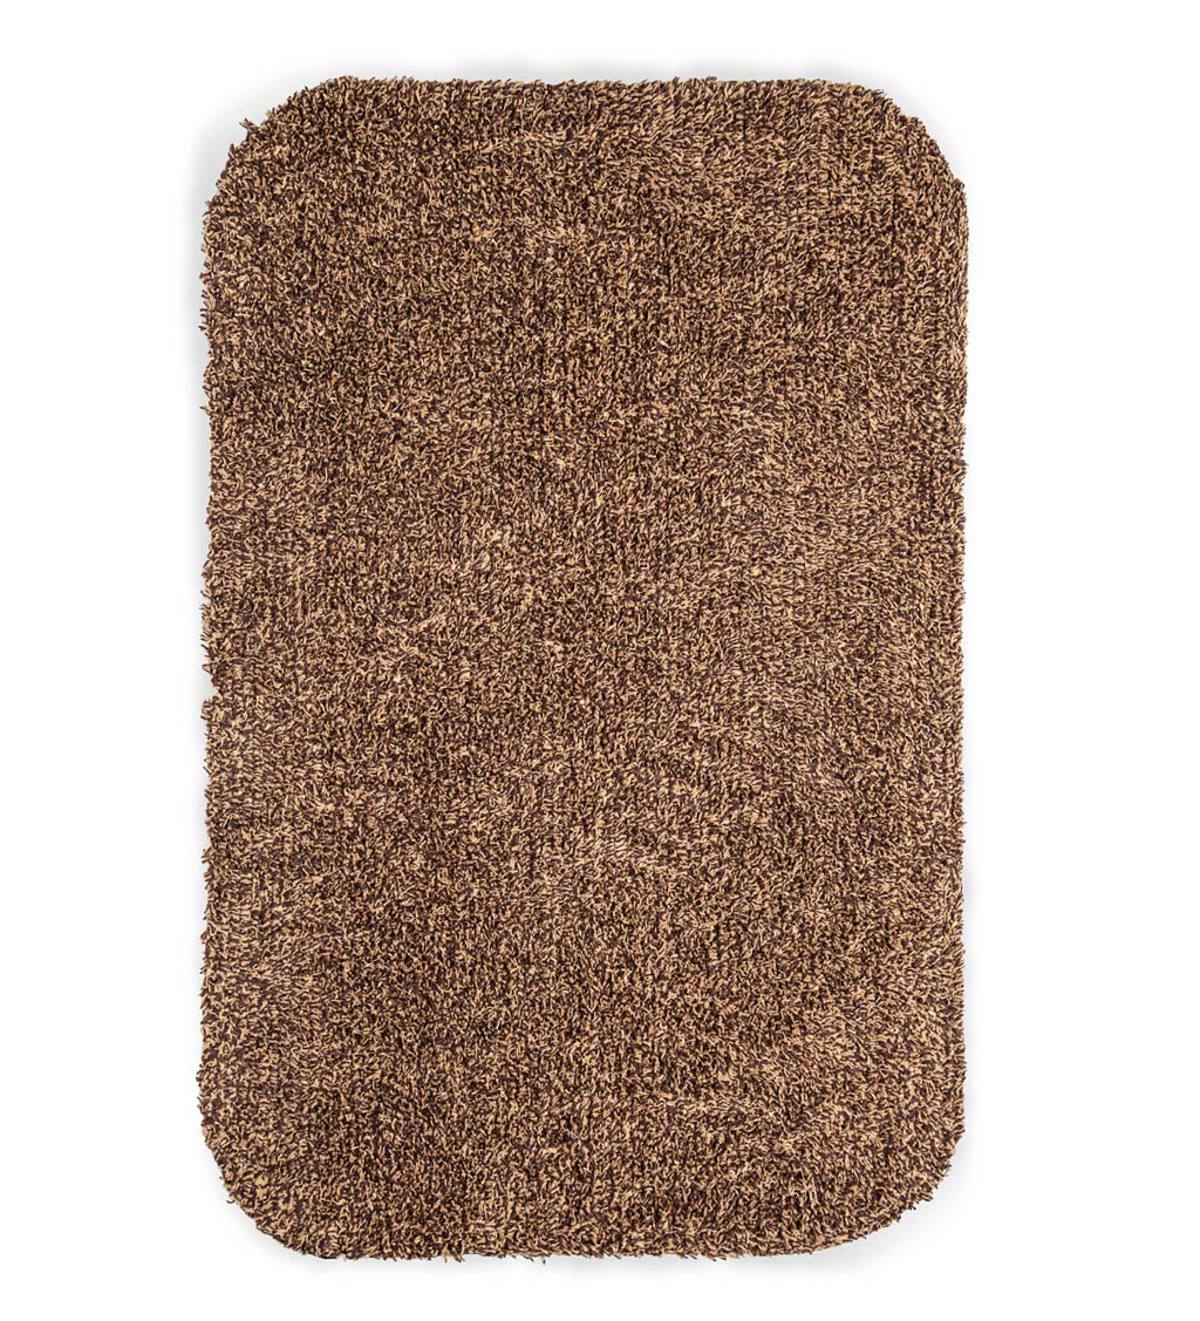 Microfiber Mud Rug With NonSkid Backing, 29" x 58" Runner Brown PlowHearth